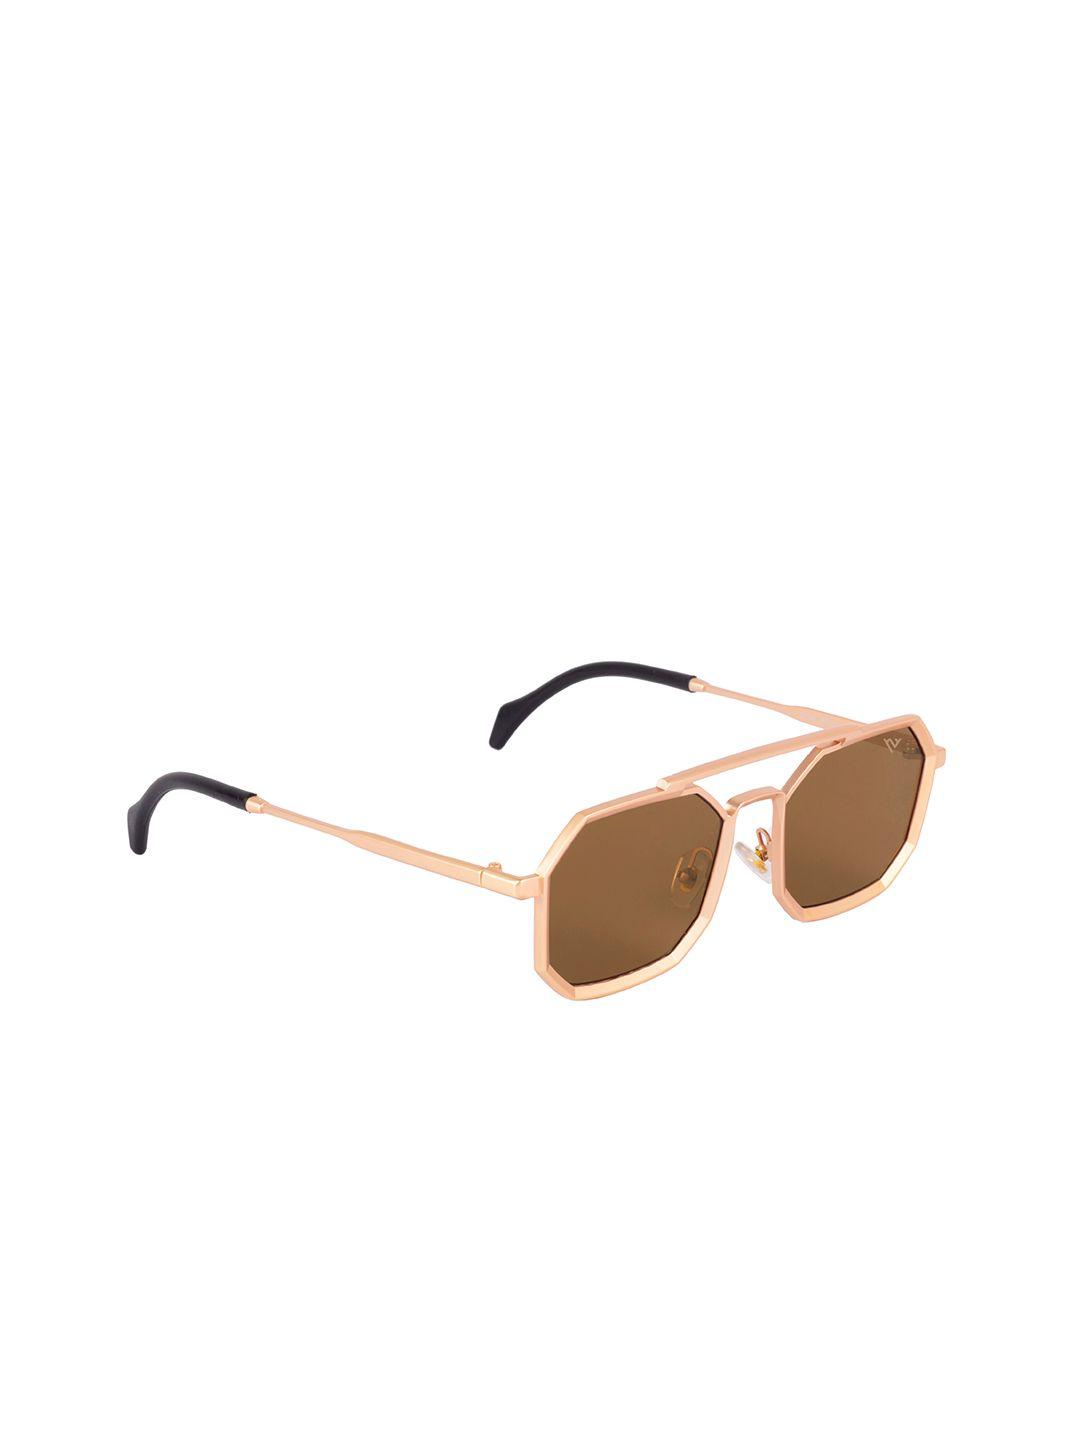 voyage unisex brown lens & gold-toned square sunglasses 2186mg3617-brown